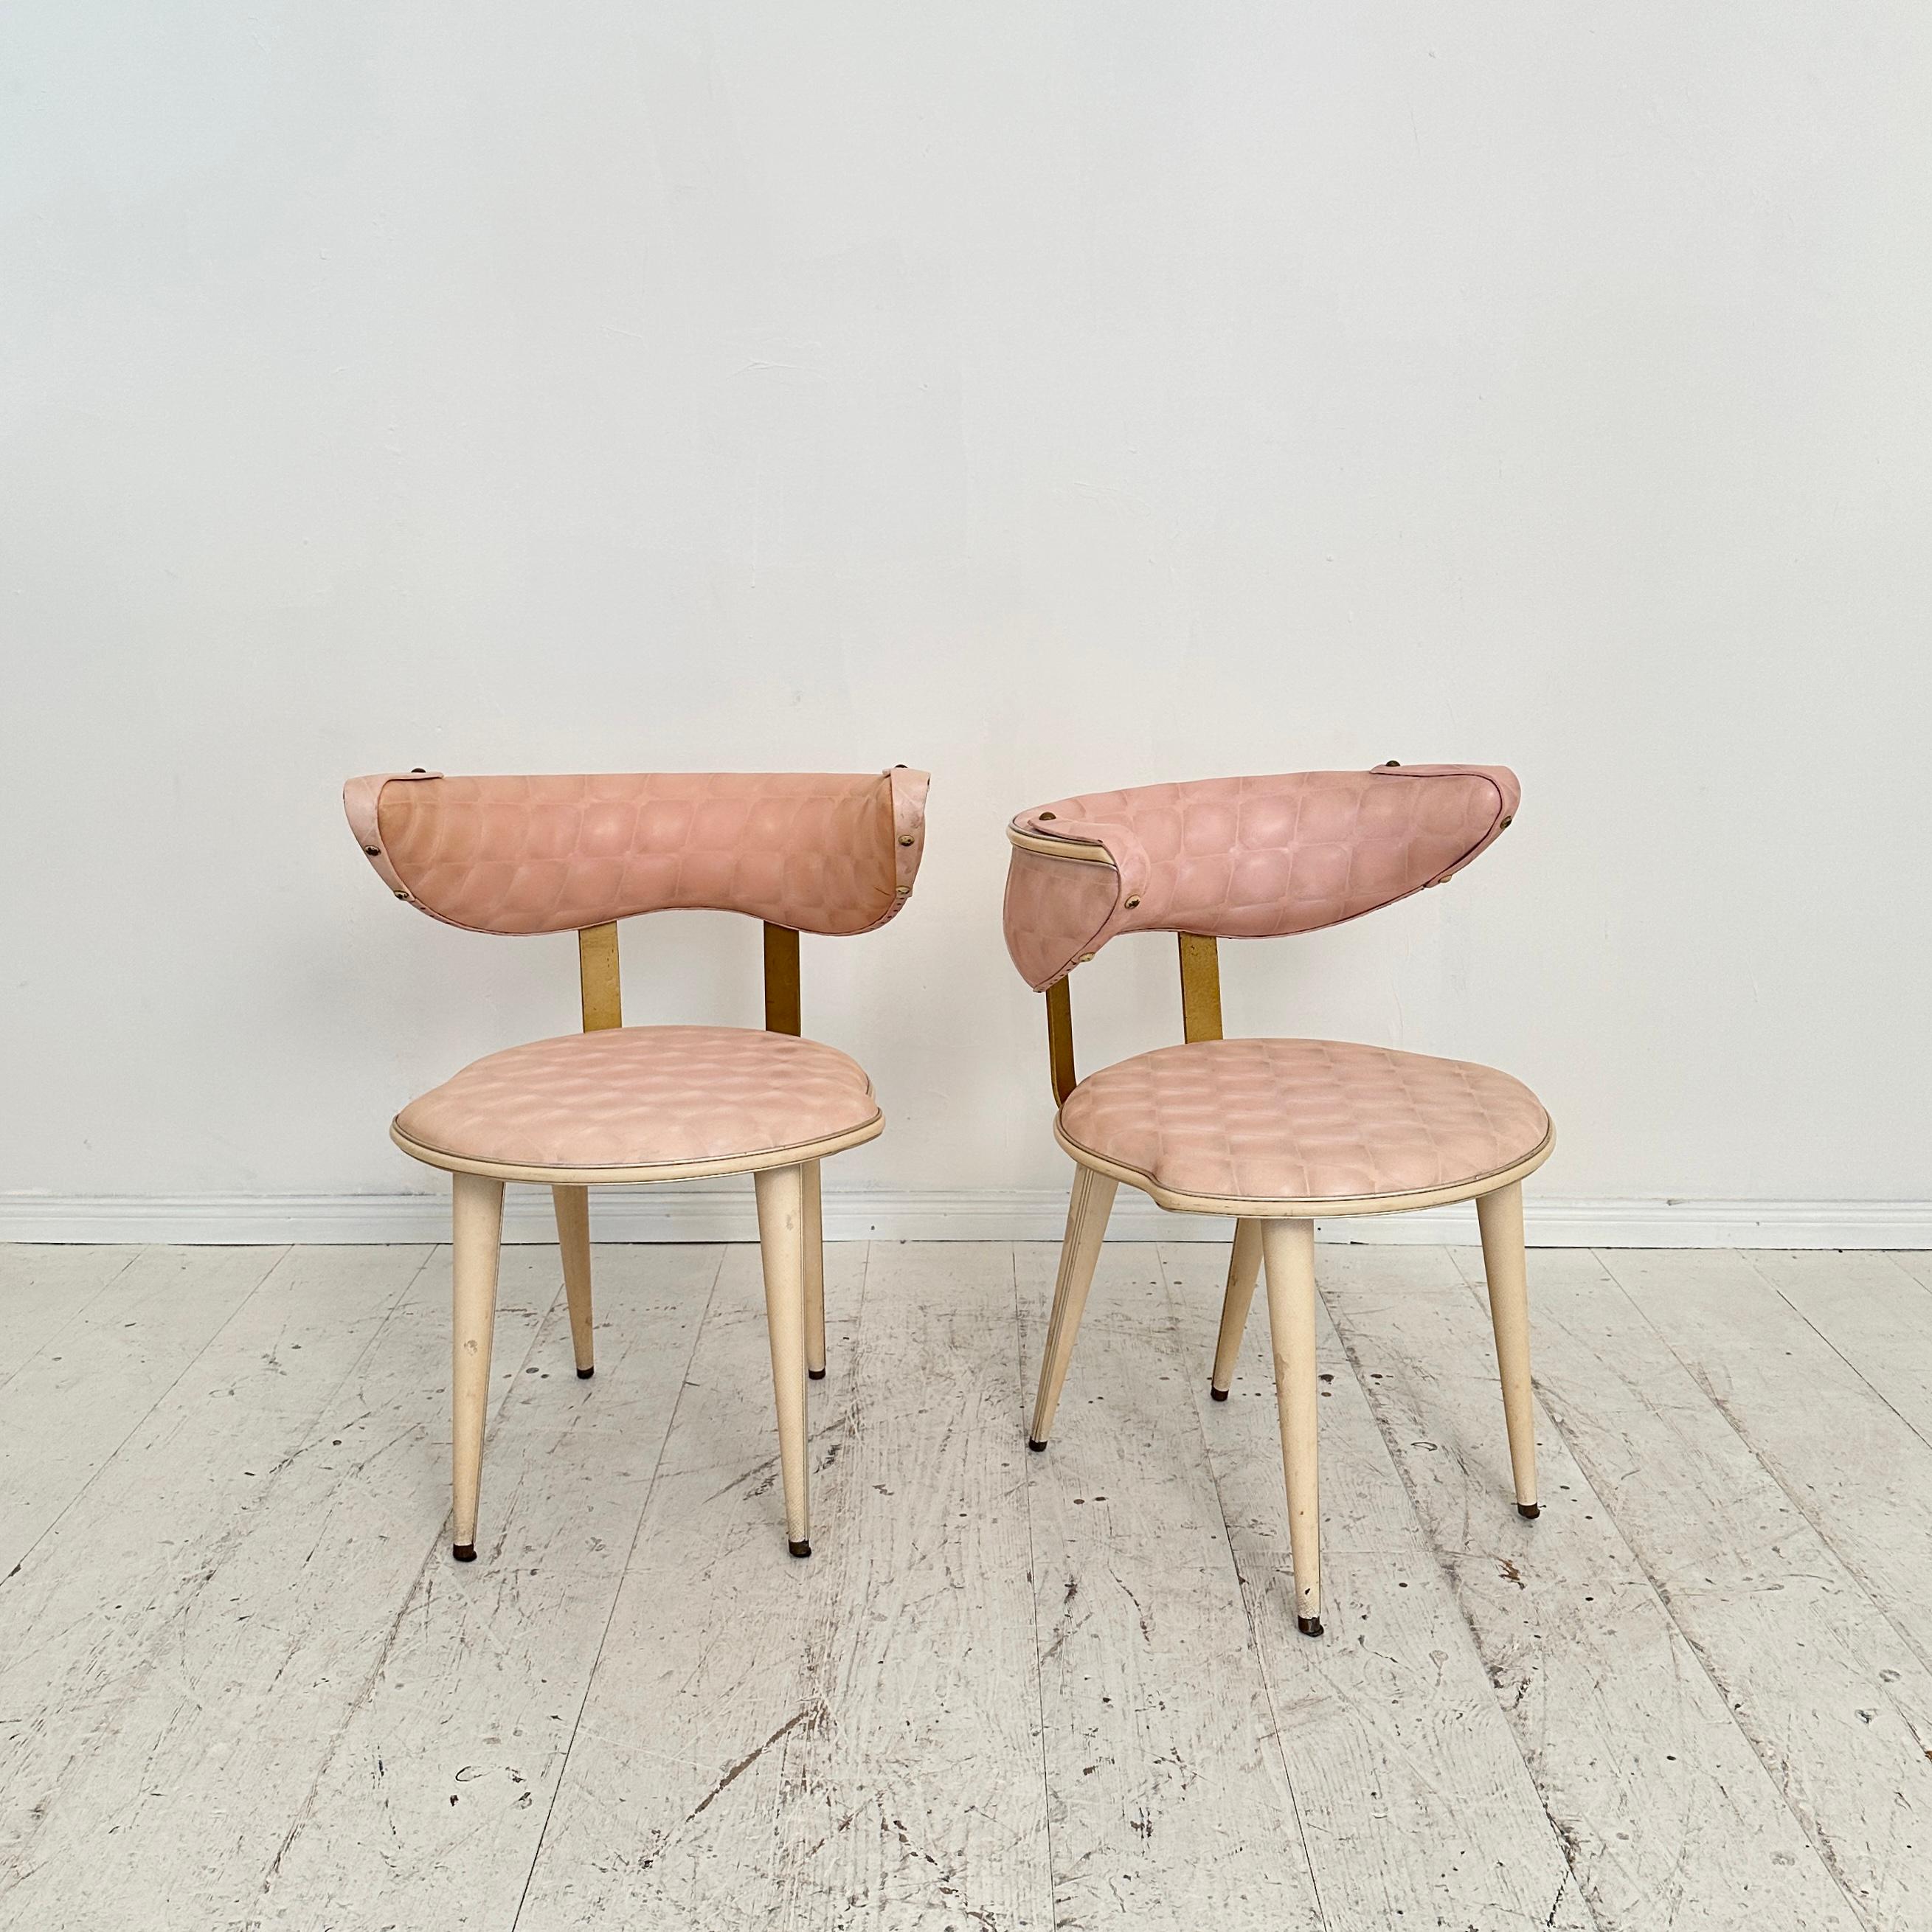 Pair of Mid Century Armchairs by Umberto Mascagni, light pink and white, 1954 For Sale 1